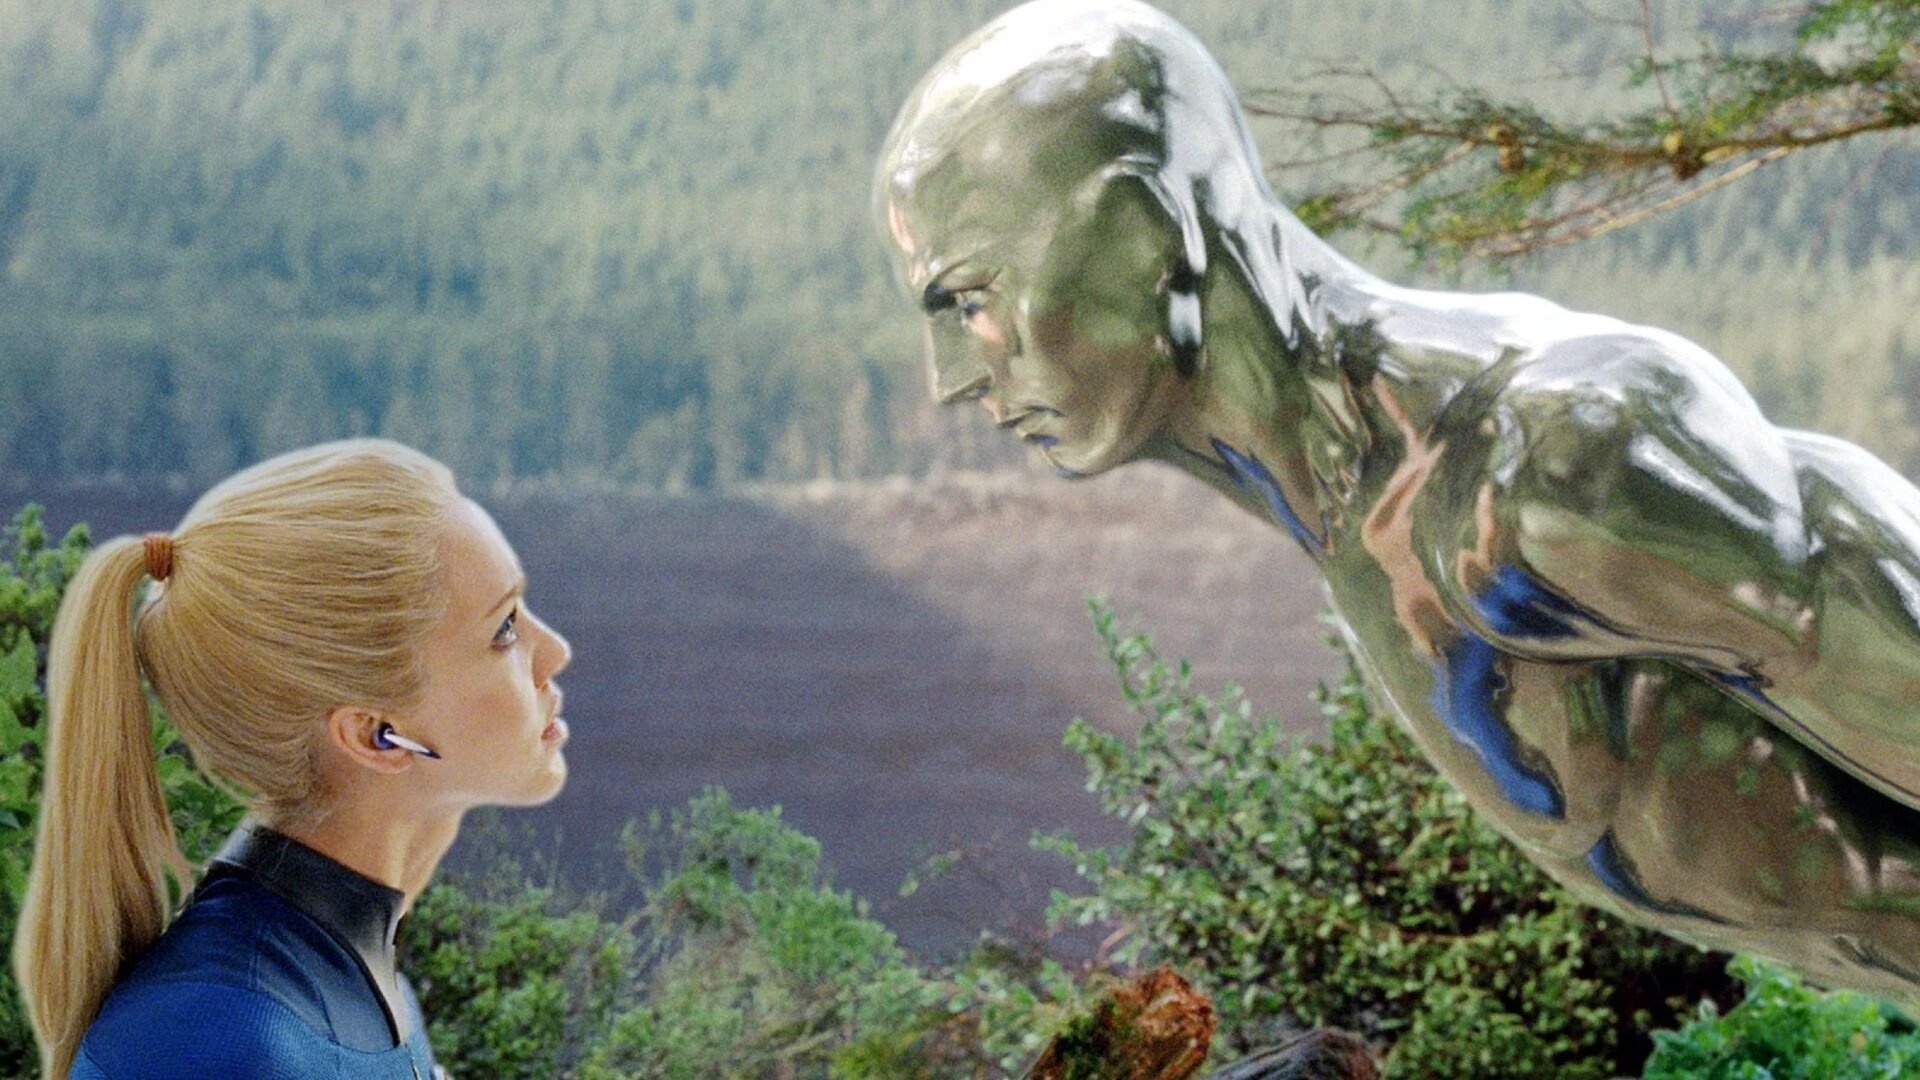 Doug Jones as Silver Surfer, Behind the scenes photo, Rise of the Silver Surfer, GeekTyrant exclusive, 1920x1080 Full HD Desktop